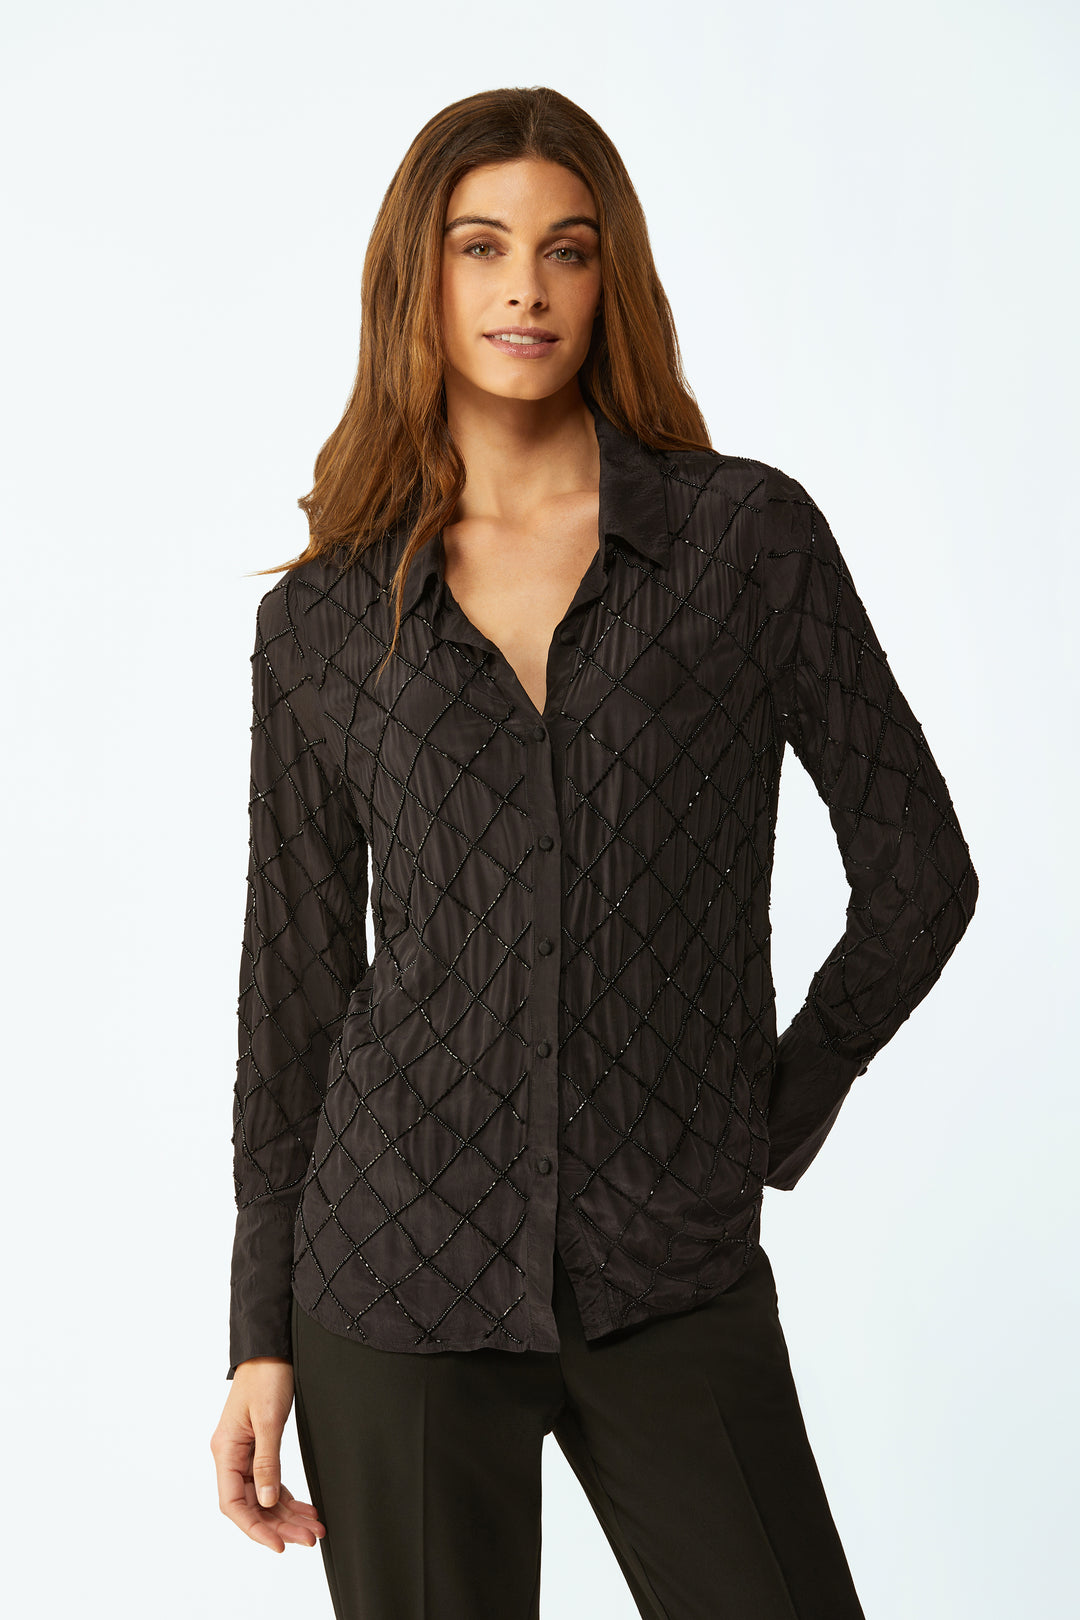 Bacall Beaded Blouse - Black